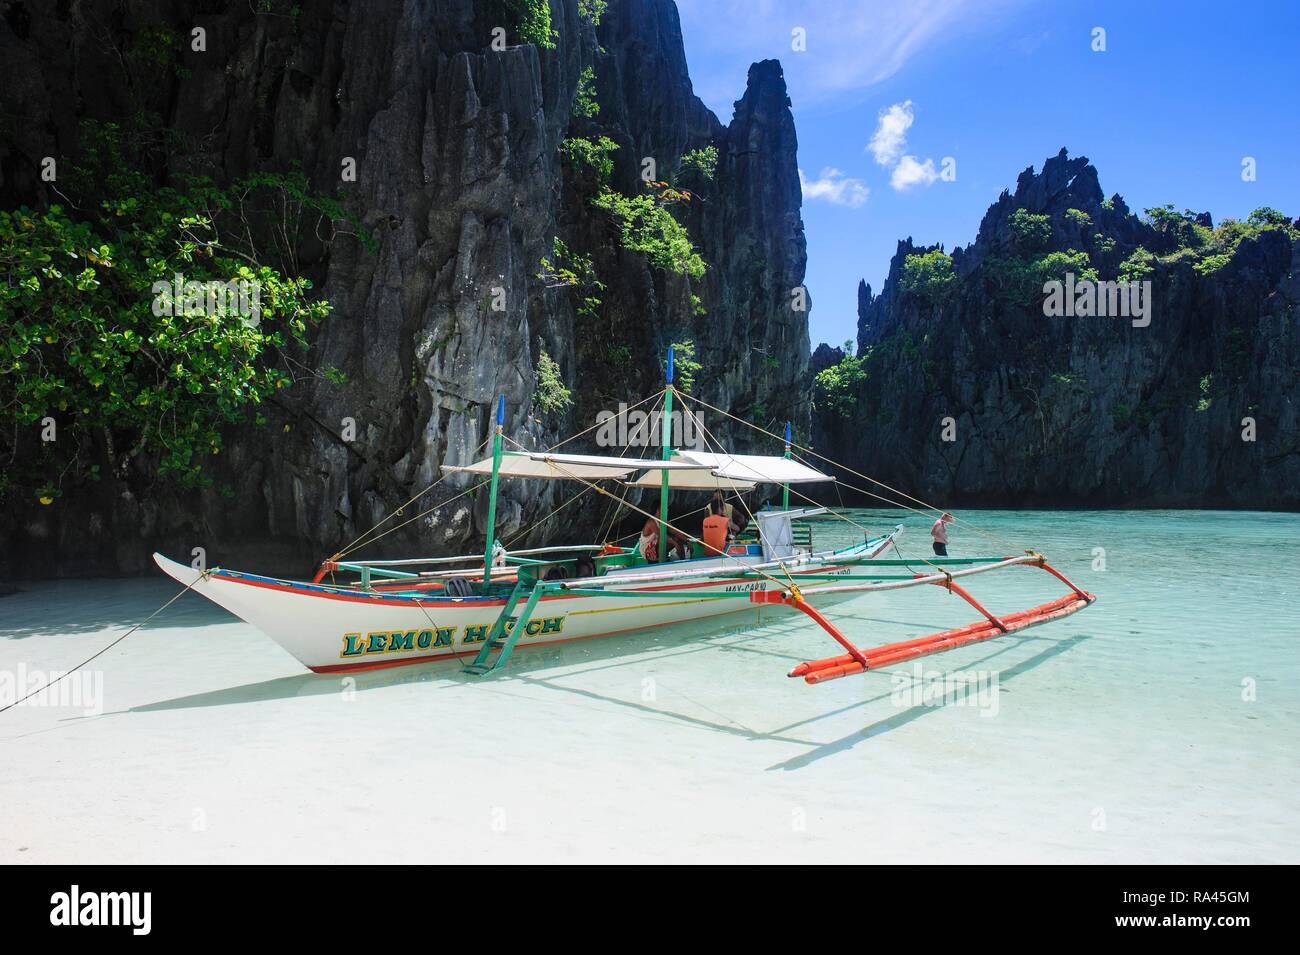 Outrigger boat on the beach, El Nido, Bacuit archipelago, Palawan, Philippines Stock Photo